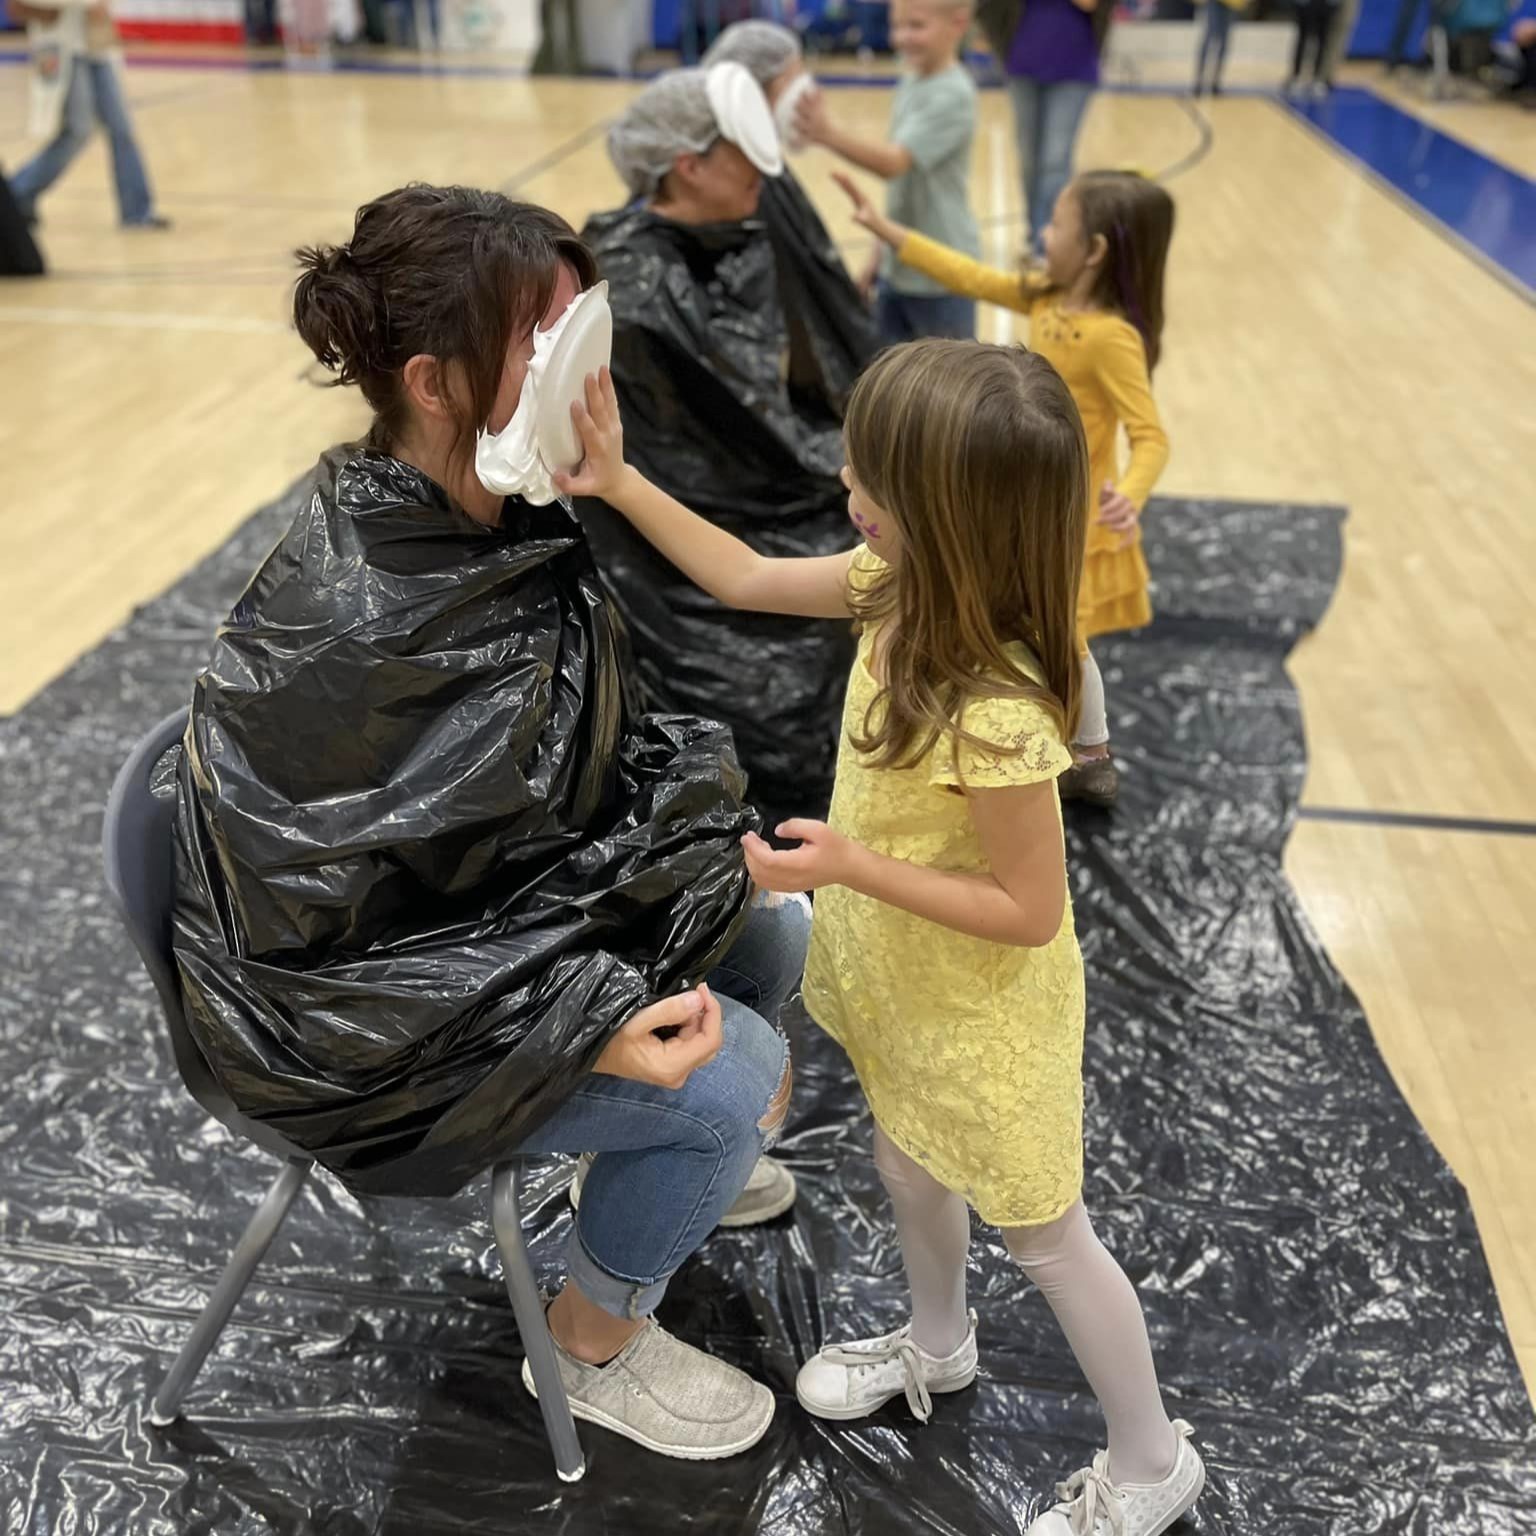 Students putting pie in face of staff